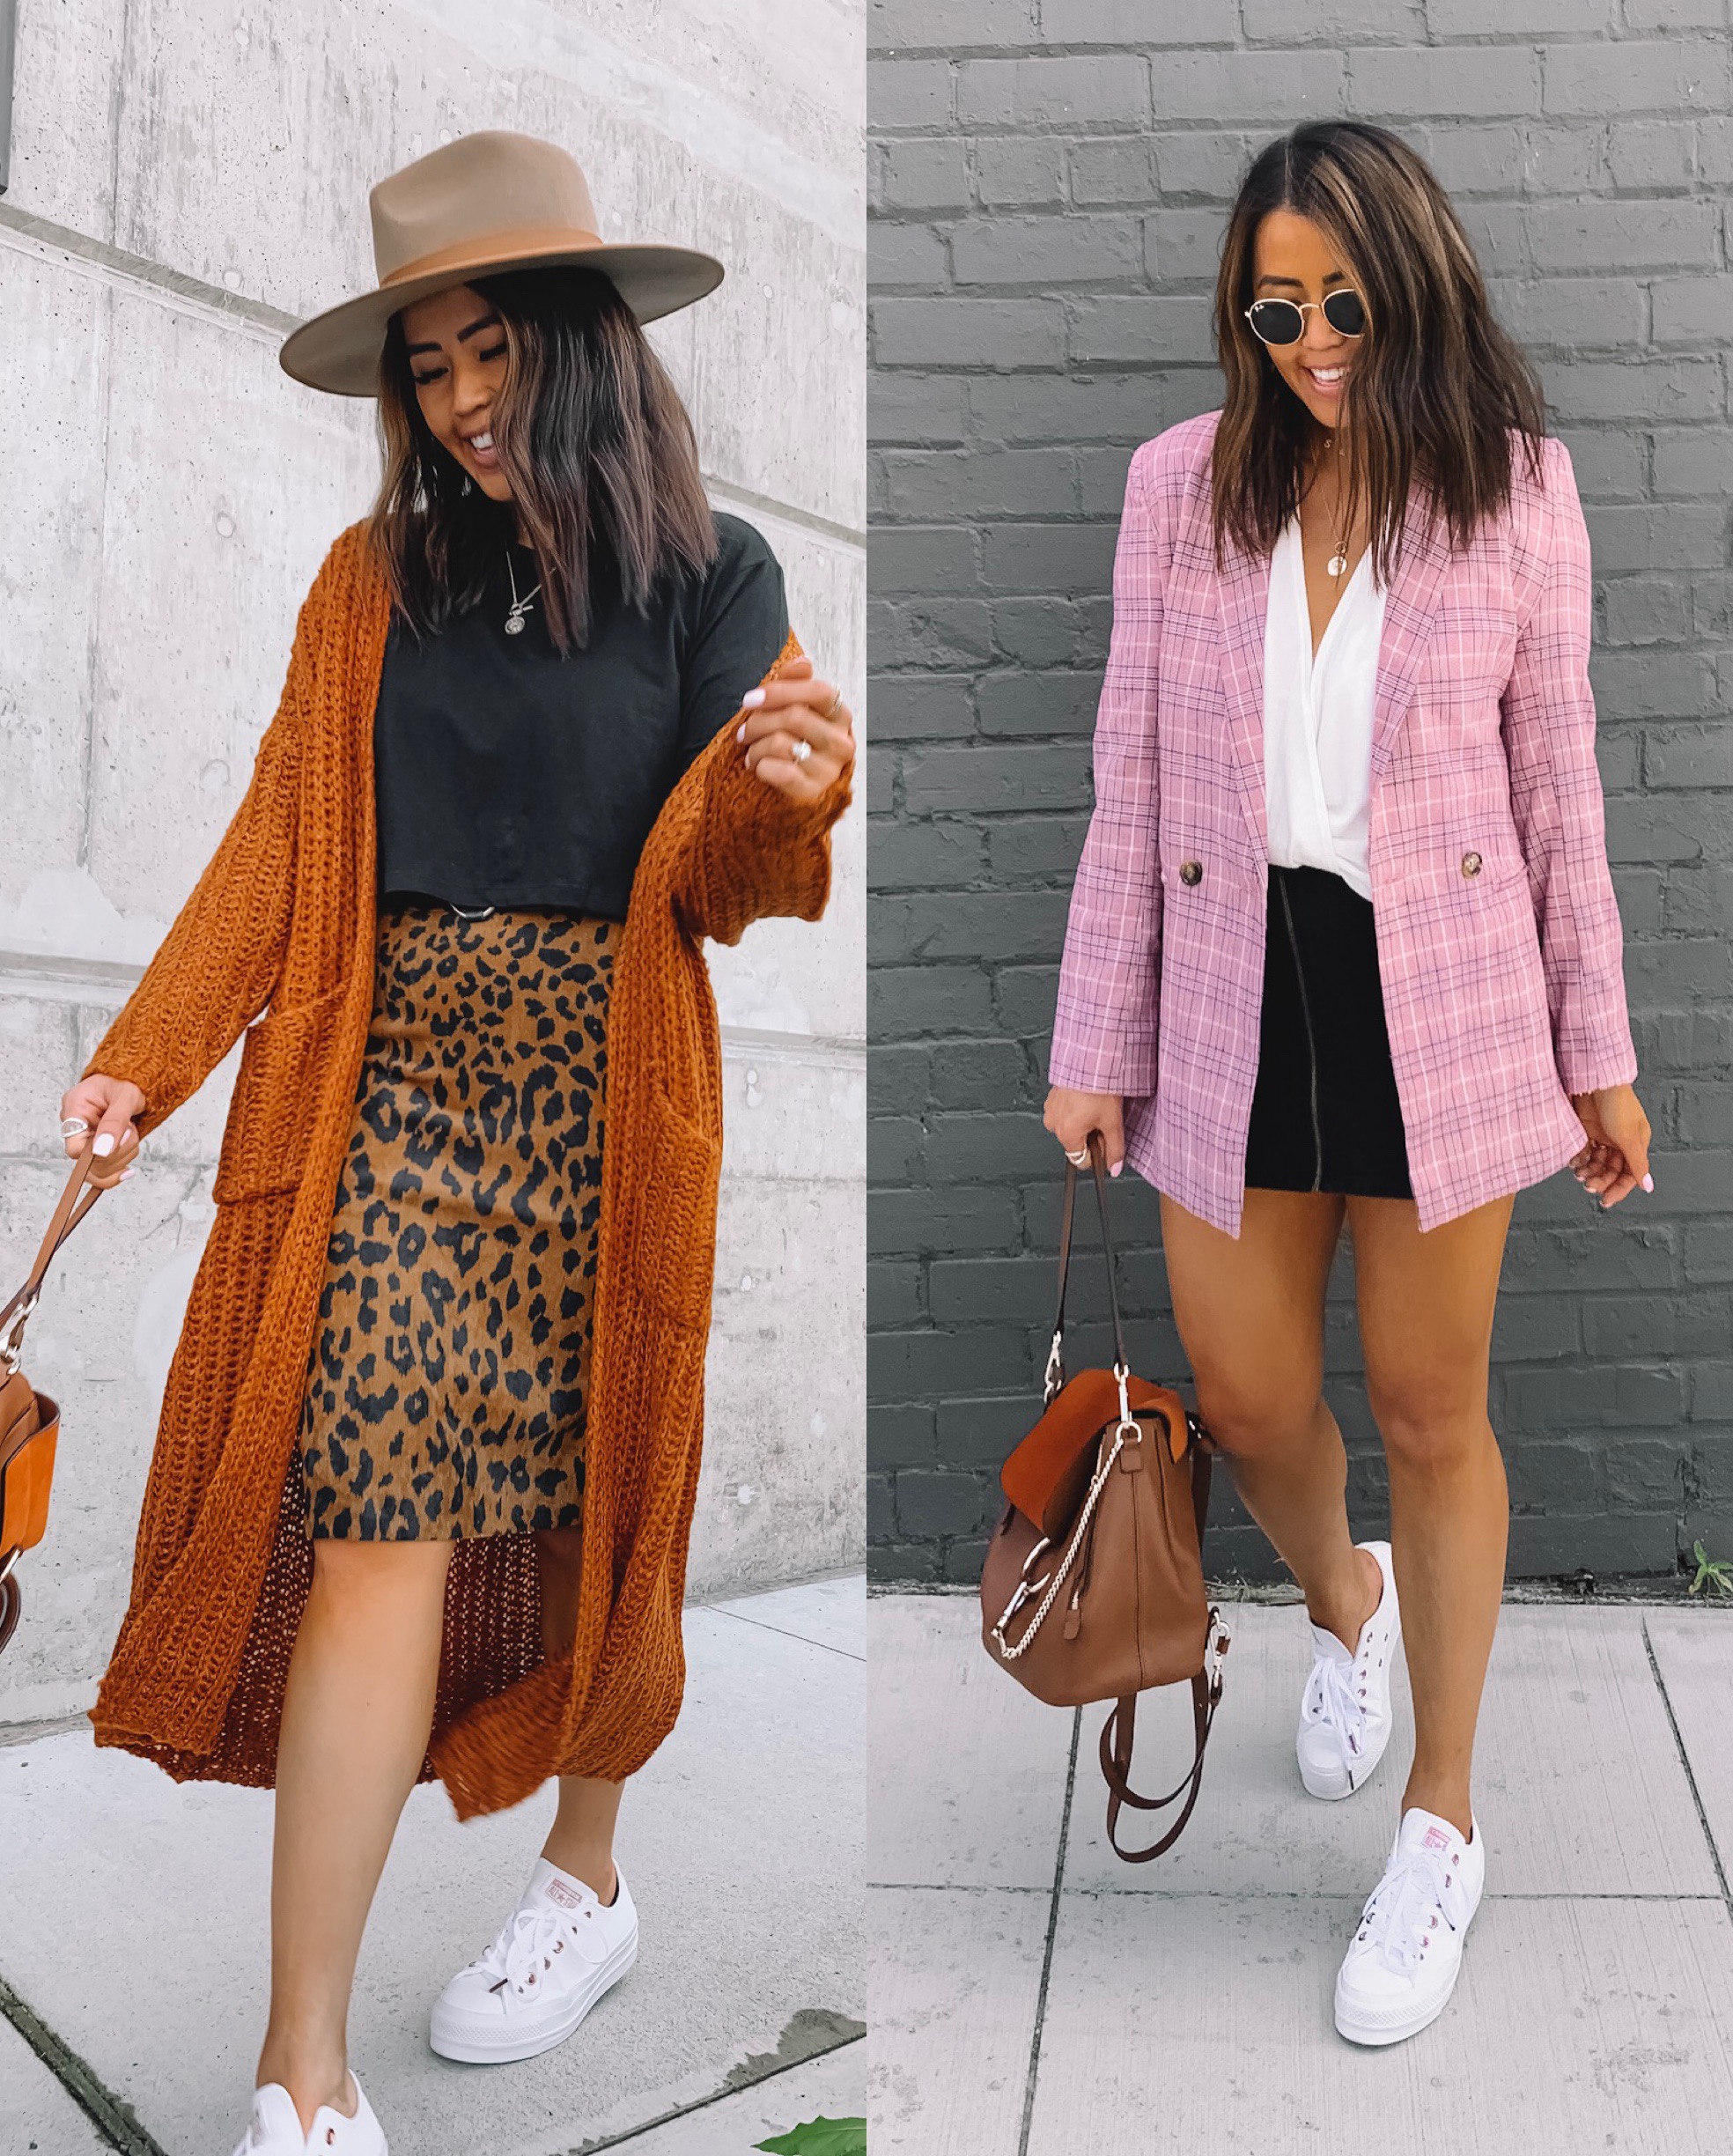 Back to School outfits & Fall Work Outfits 2019 - Gypsy Tan